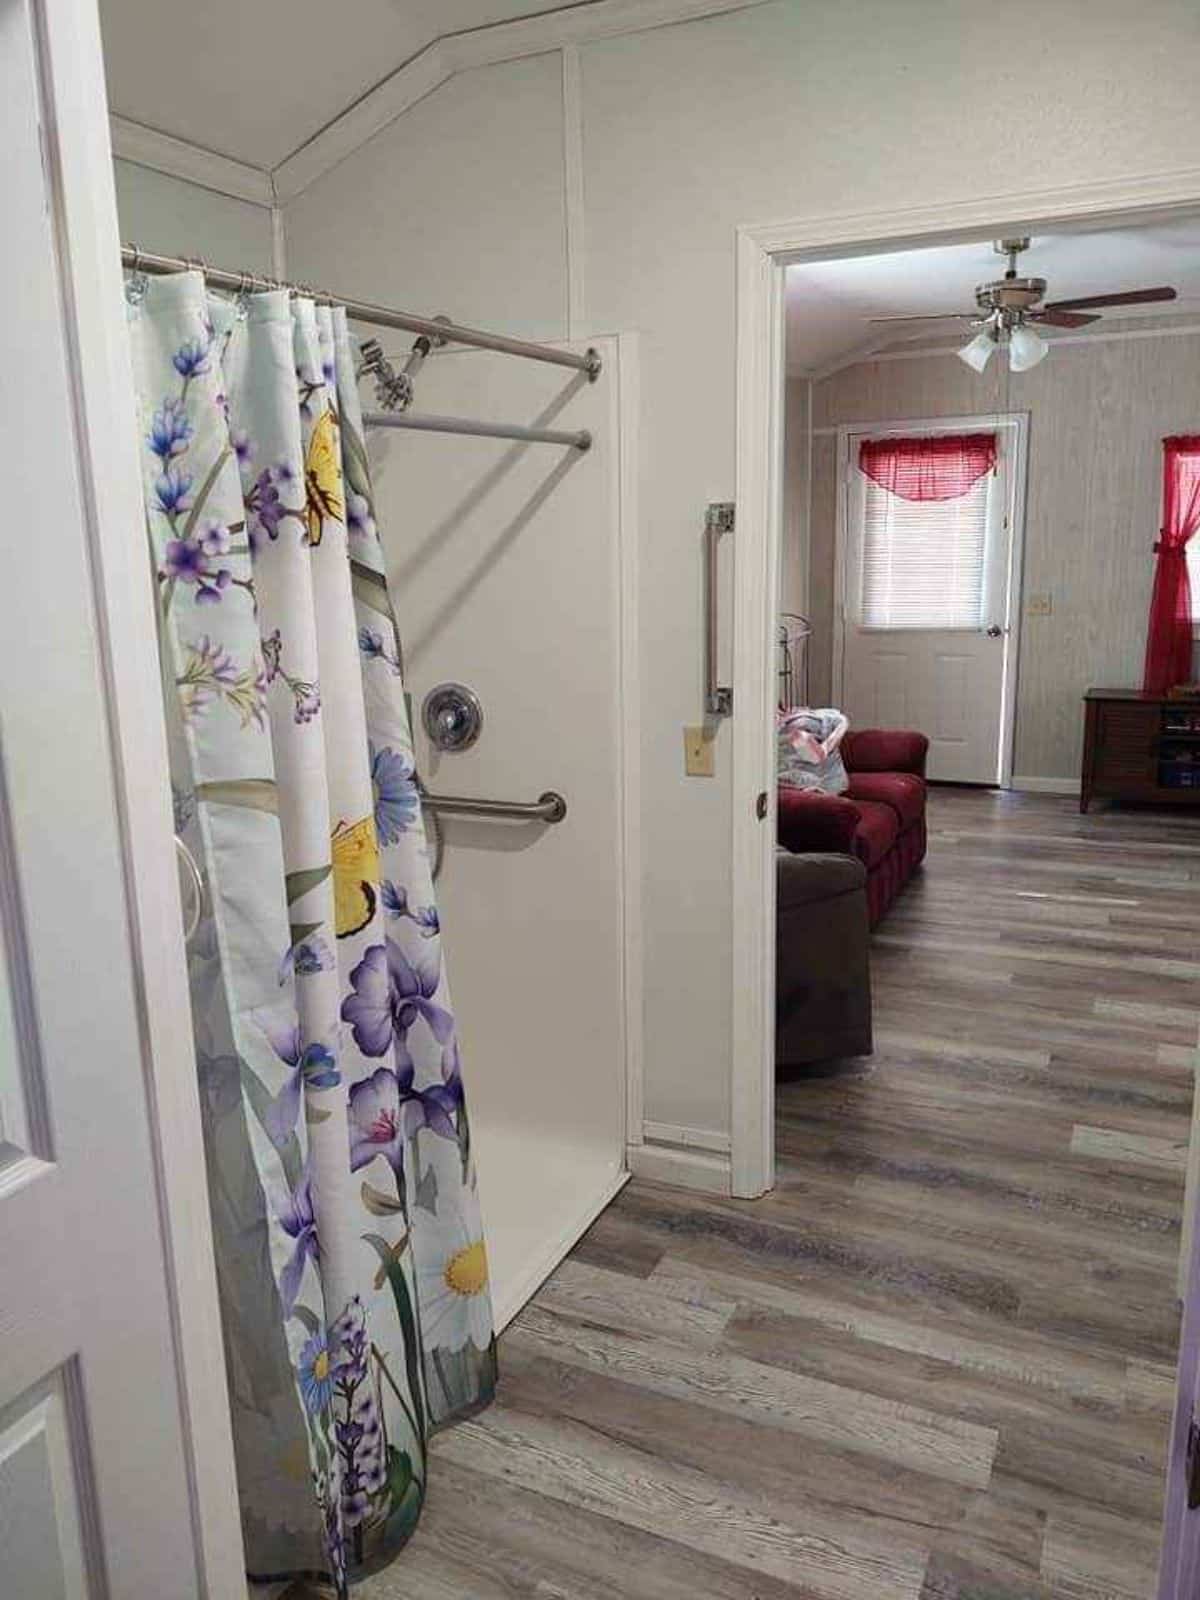 Shower area convenient for a person on wheelchair and living area is seen in the image